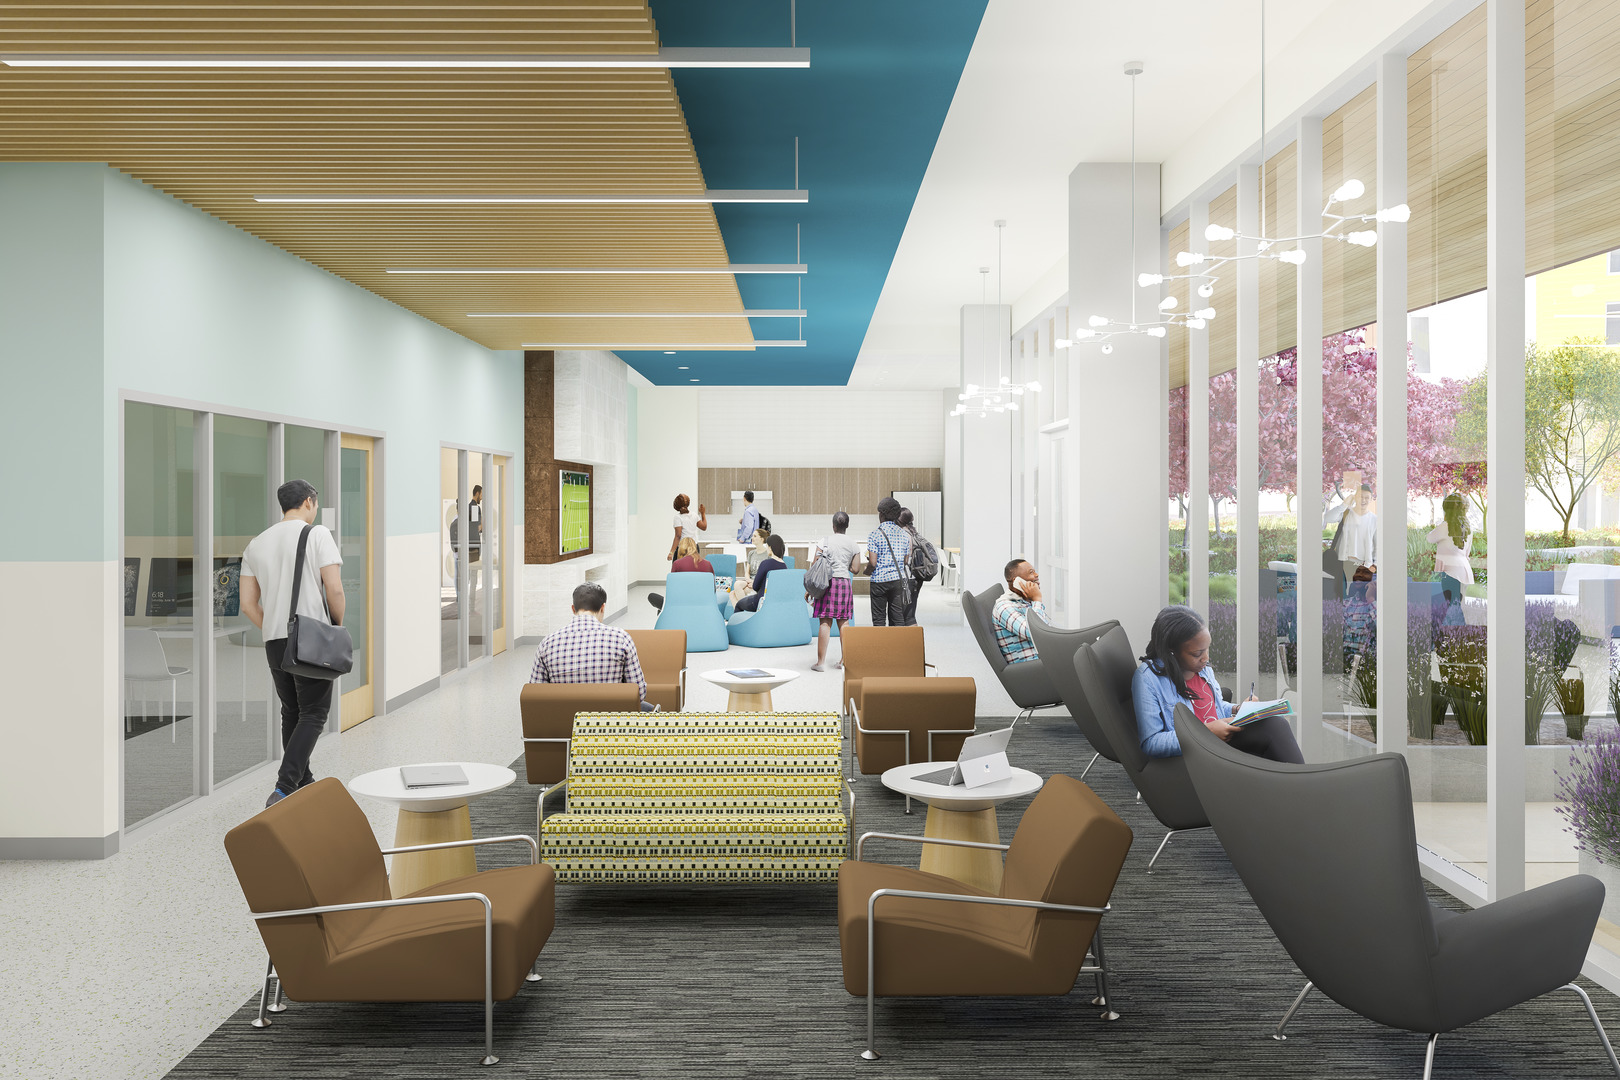 Community colleges also require architecture that encourages social interaction.